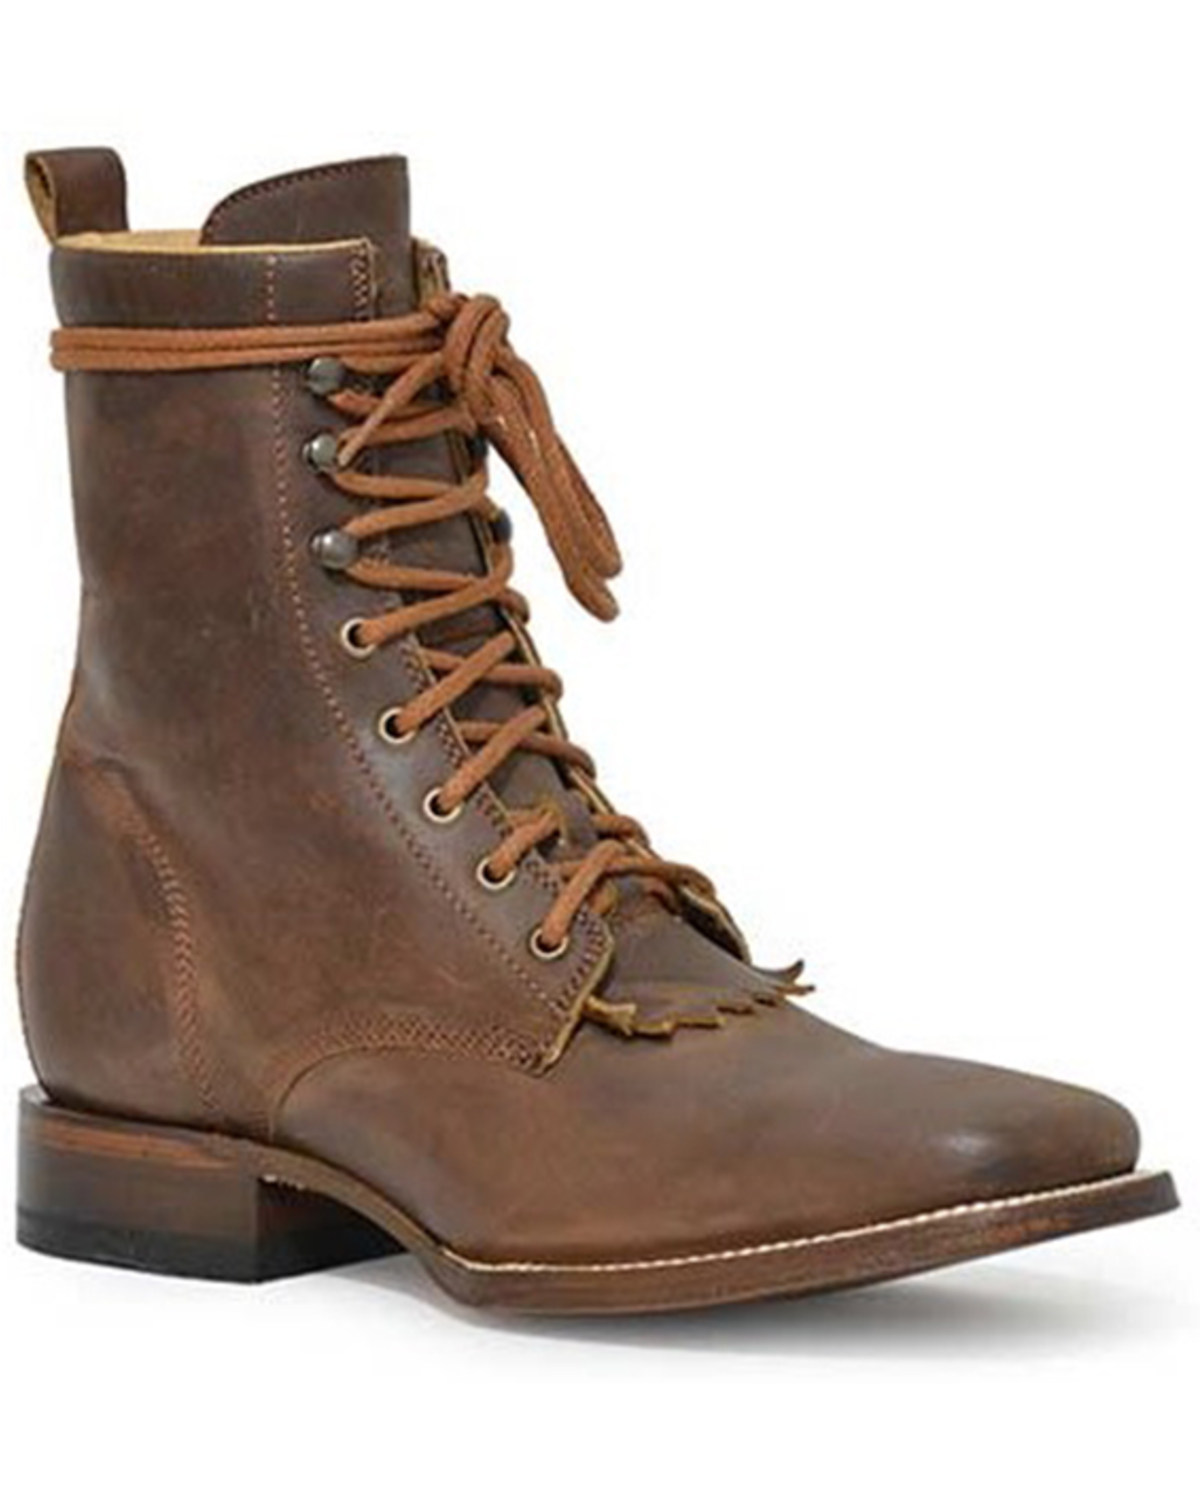 Roper Men's Lacer Lace-Up Casual Boots - Square Toe